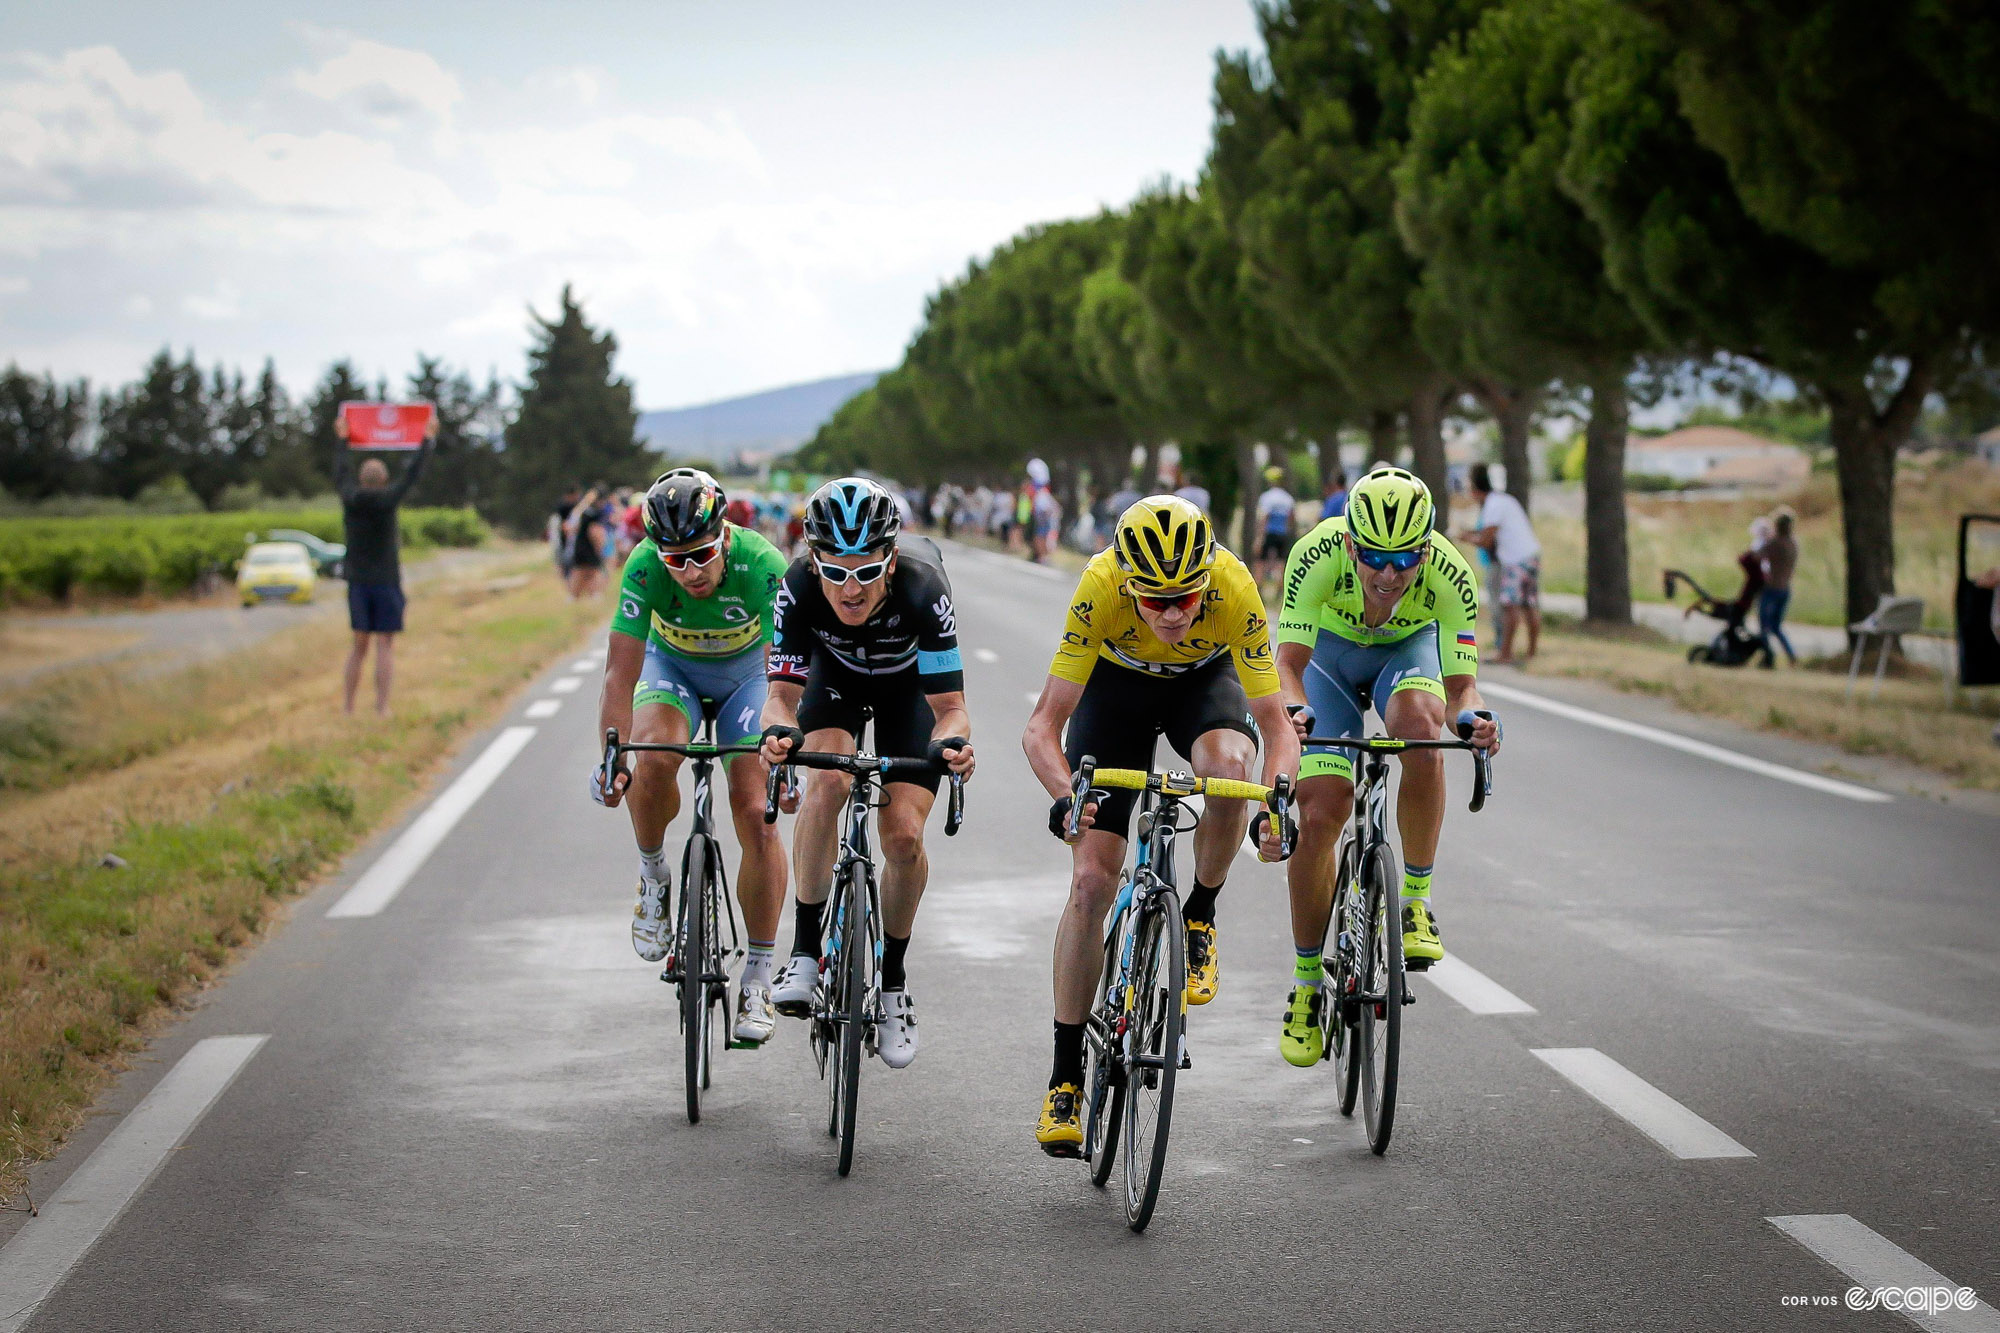 Chris Froome, in the yellow jersey of Tour de France leader, is at the front of a quartet of riders in a late-race break. Geraint Thomas is on his wheel as the two GC contenders try to get time, while Peter Sagan sits behind with a mildly amused expression, and his teammate Maciej Bodnar split to the right.